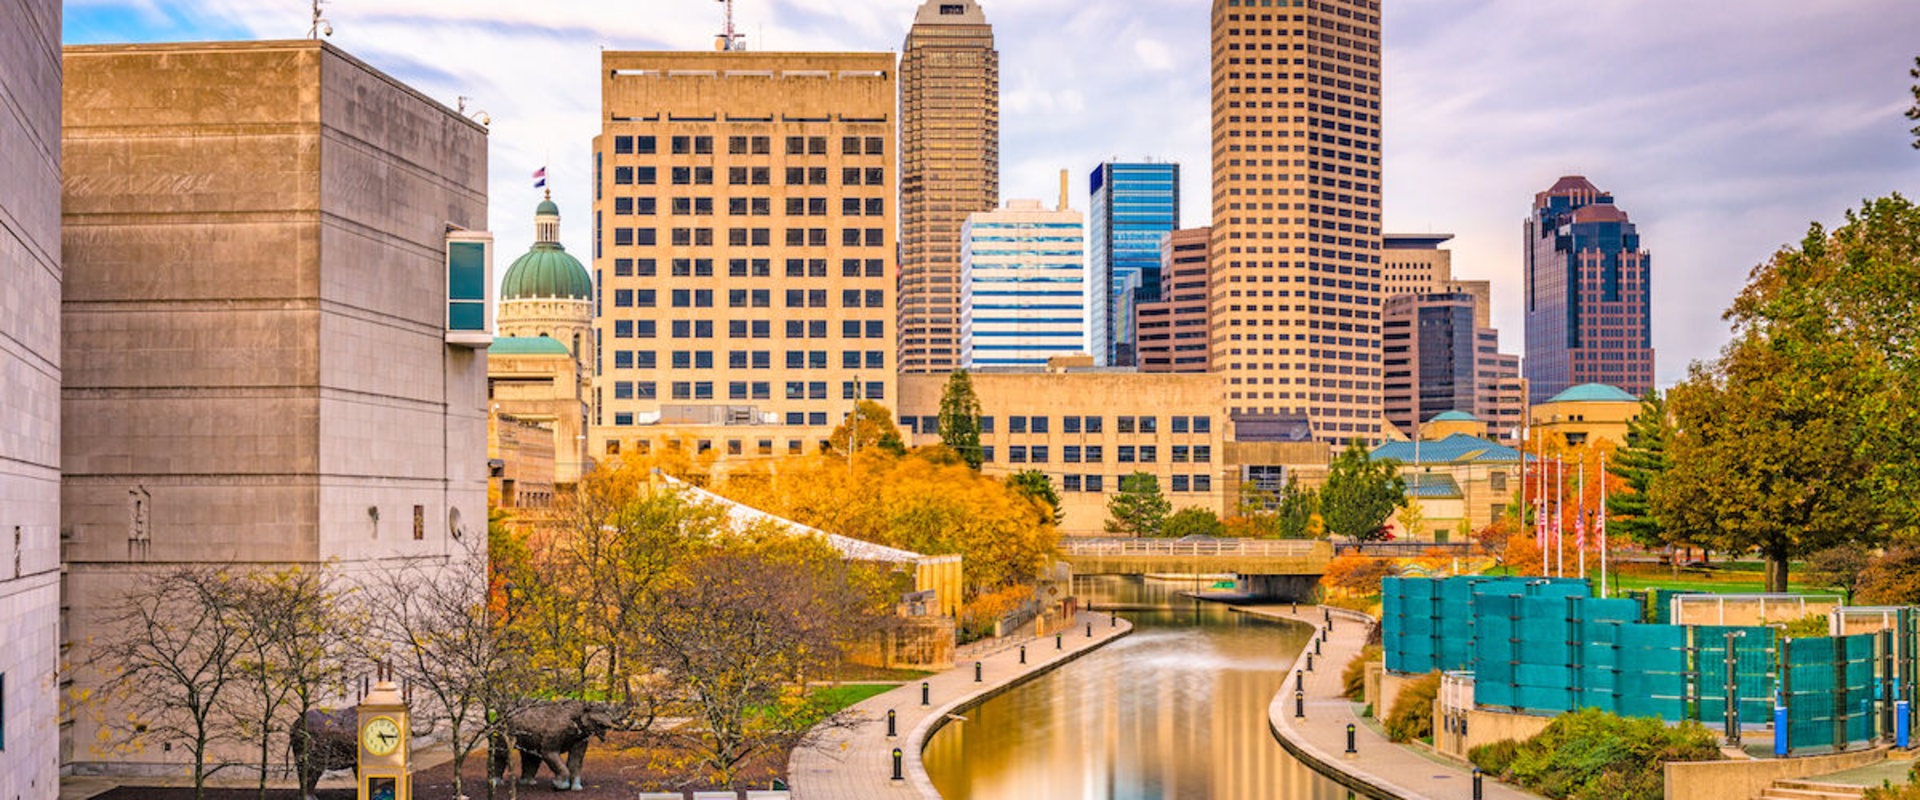 How Old is the City of Indianapolis, Indiana?